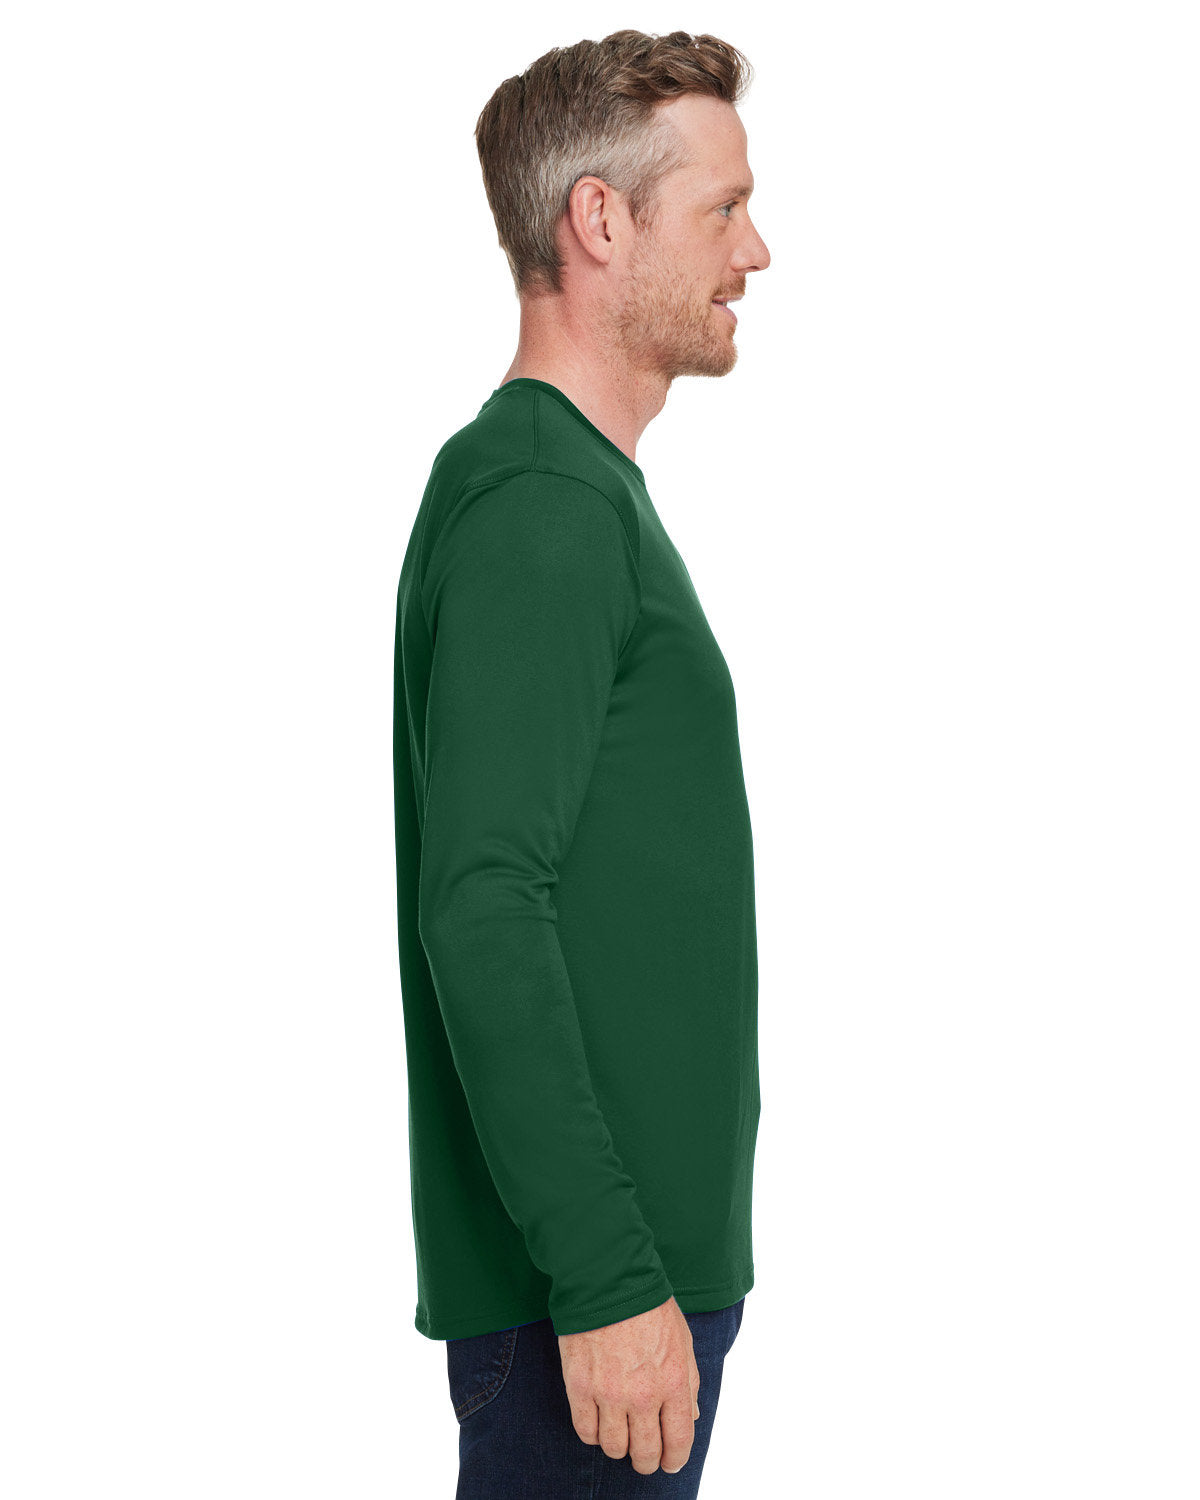 Under Armour Men's Tech Long-Sleeve Customized T-Shirts, Forest Green